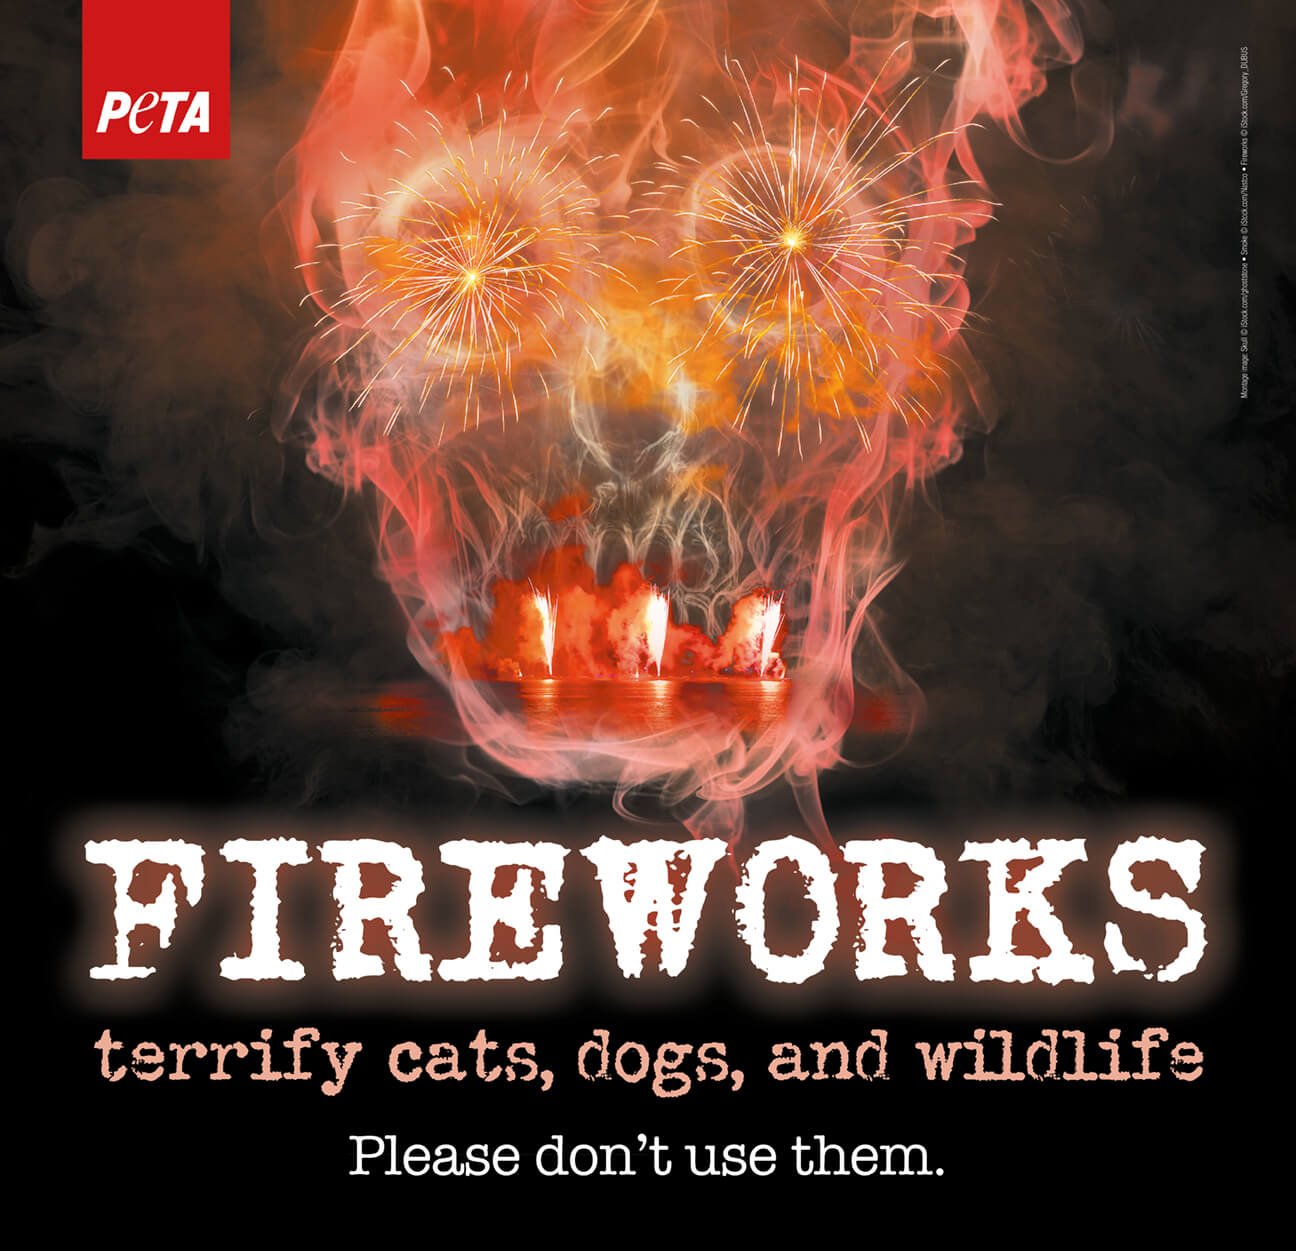 end of year victories by PETA supporters involving temporary fireworks ban in Phoenix, Oregon